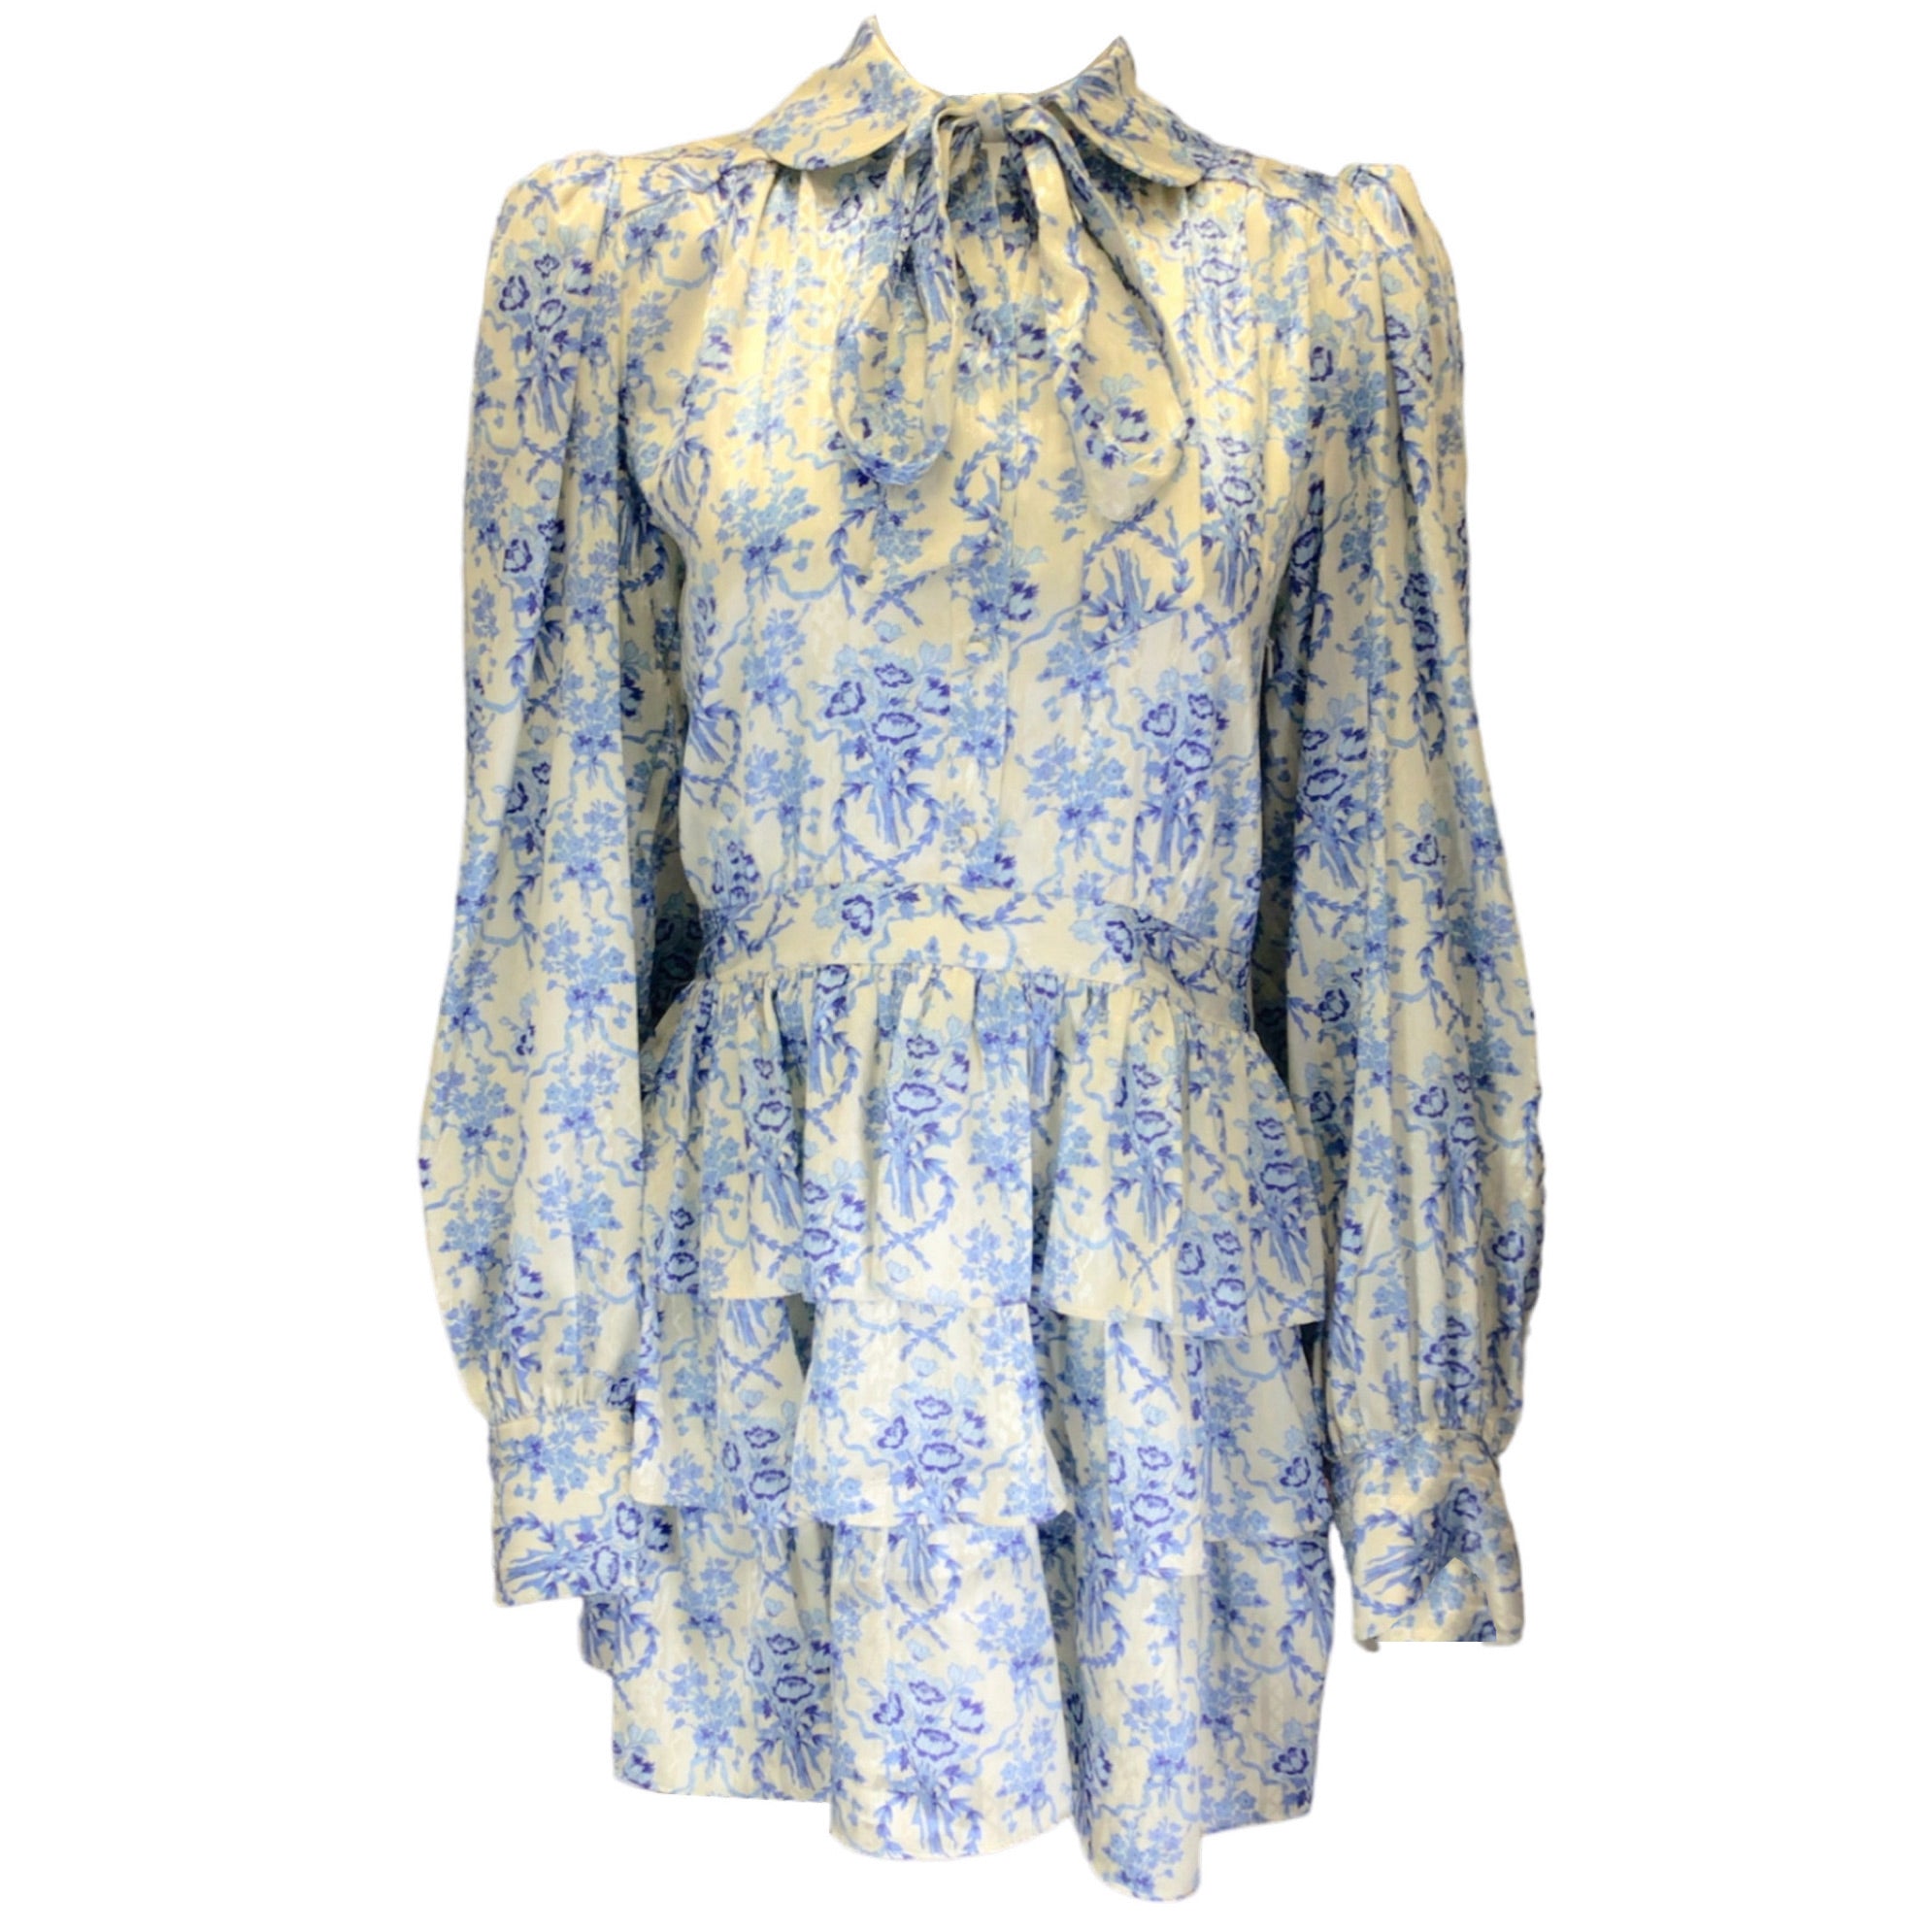 LoveShackFancy Ivory / Blue Daly Frosted Shores Print Floral Satin Mini Dress